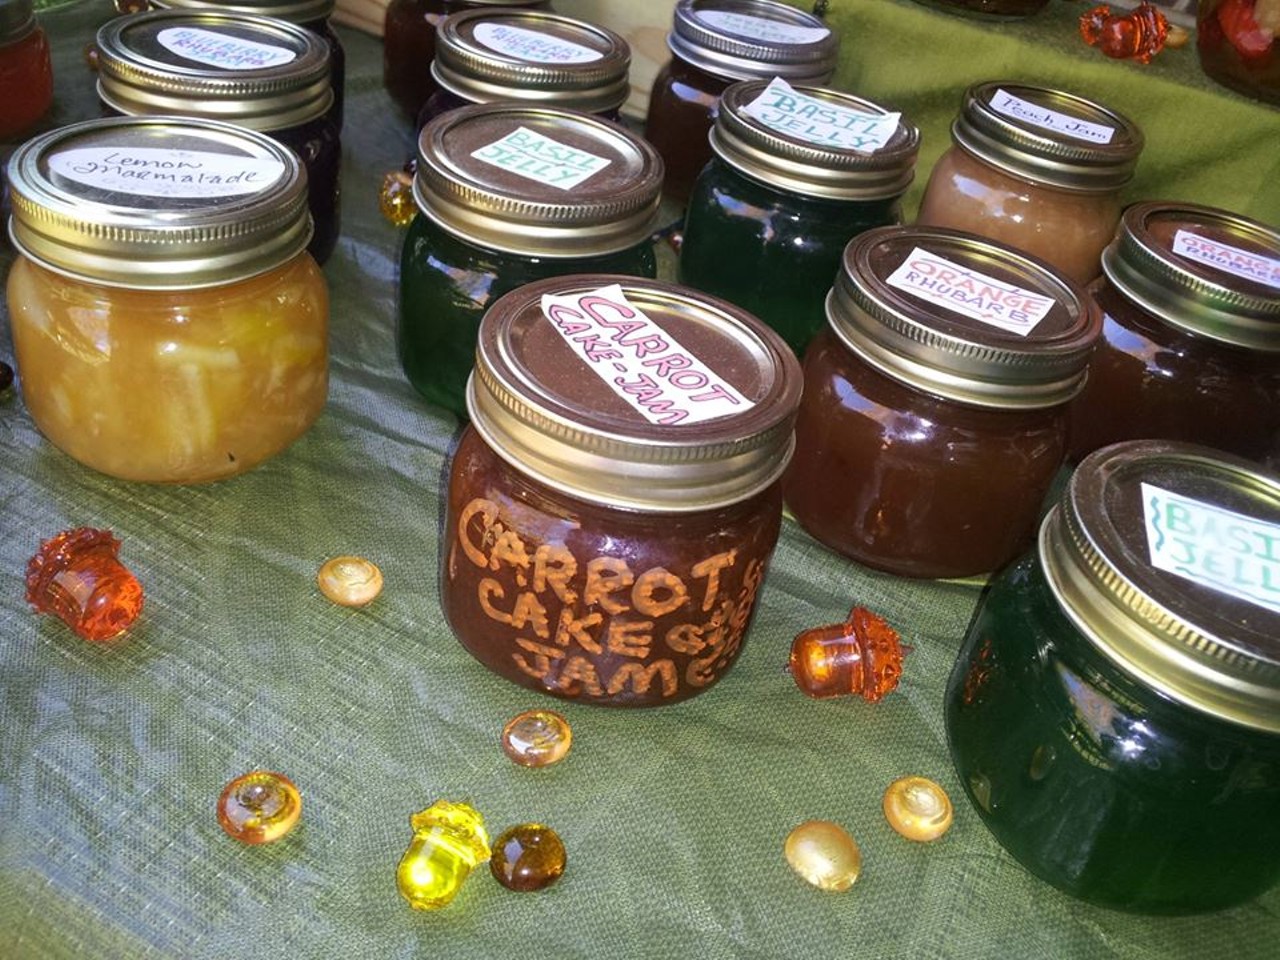 Laura's Specialty Jams and Jelly's includes flavors like habanero-apricot, carrot cake and ginger. All the toppings are made with fresh fruits and vegetables. Yum!